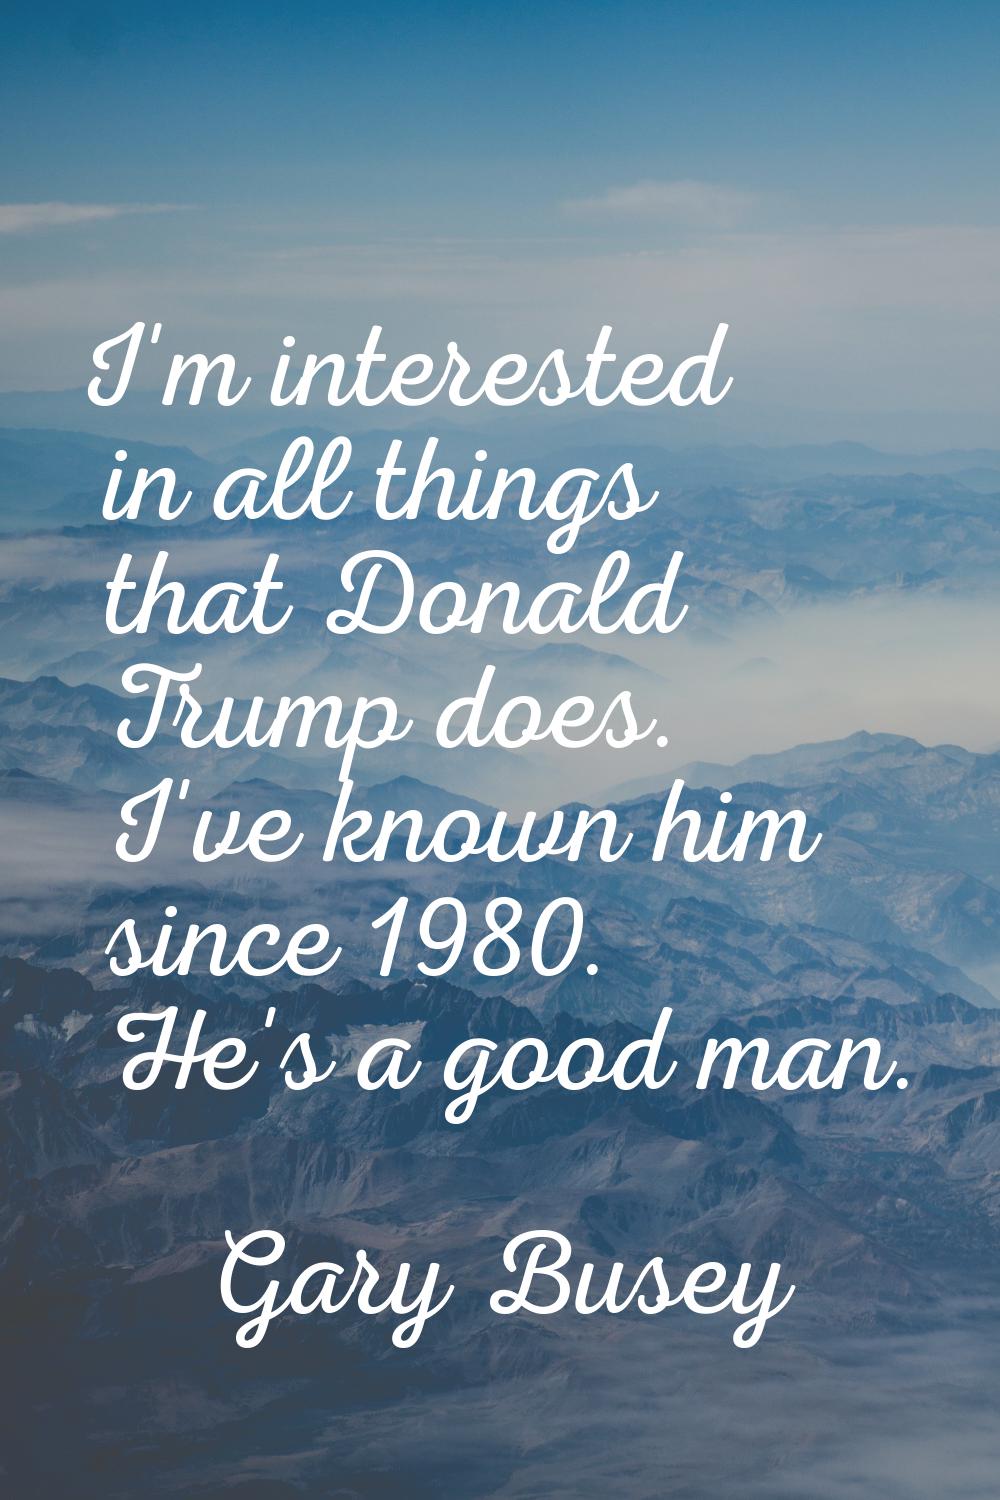 I'm interested in all things that Donald Trump does. I've known him since 1980. He's a good man.